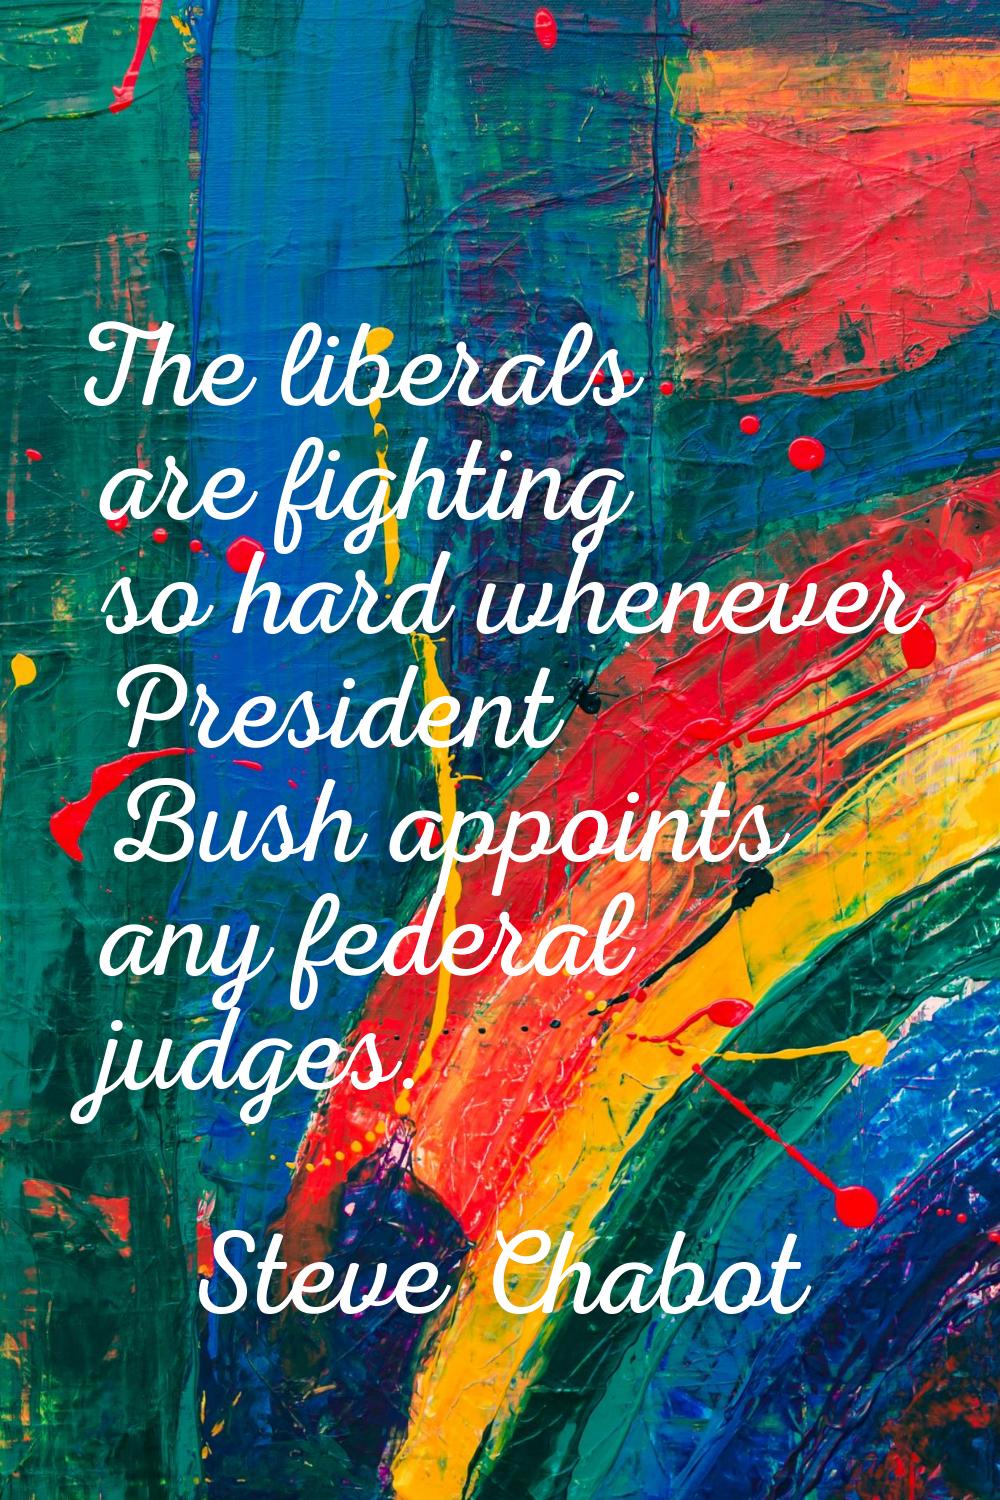 The liberals are fighting so hard whenever President Bush appoints any federal judges.